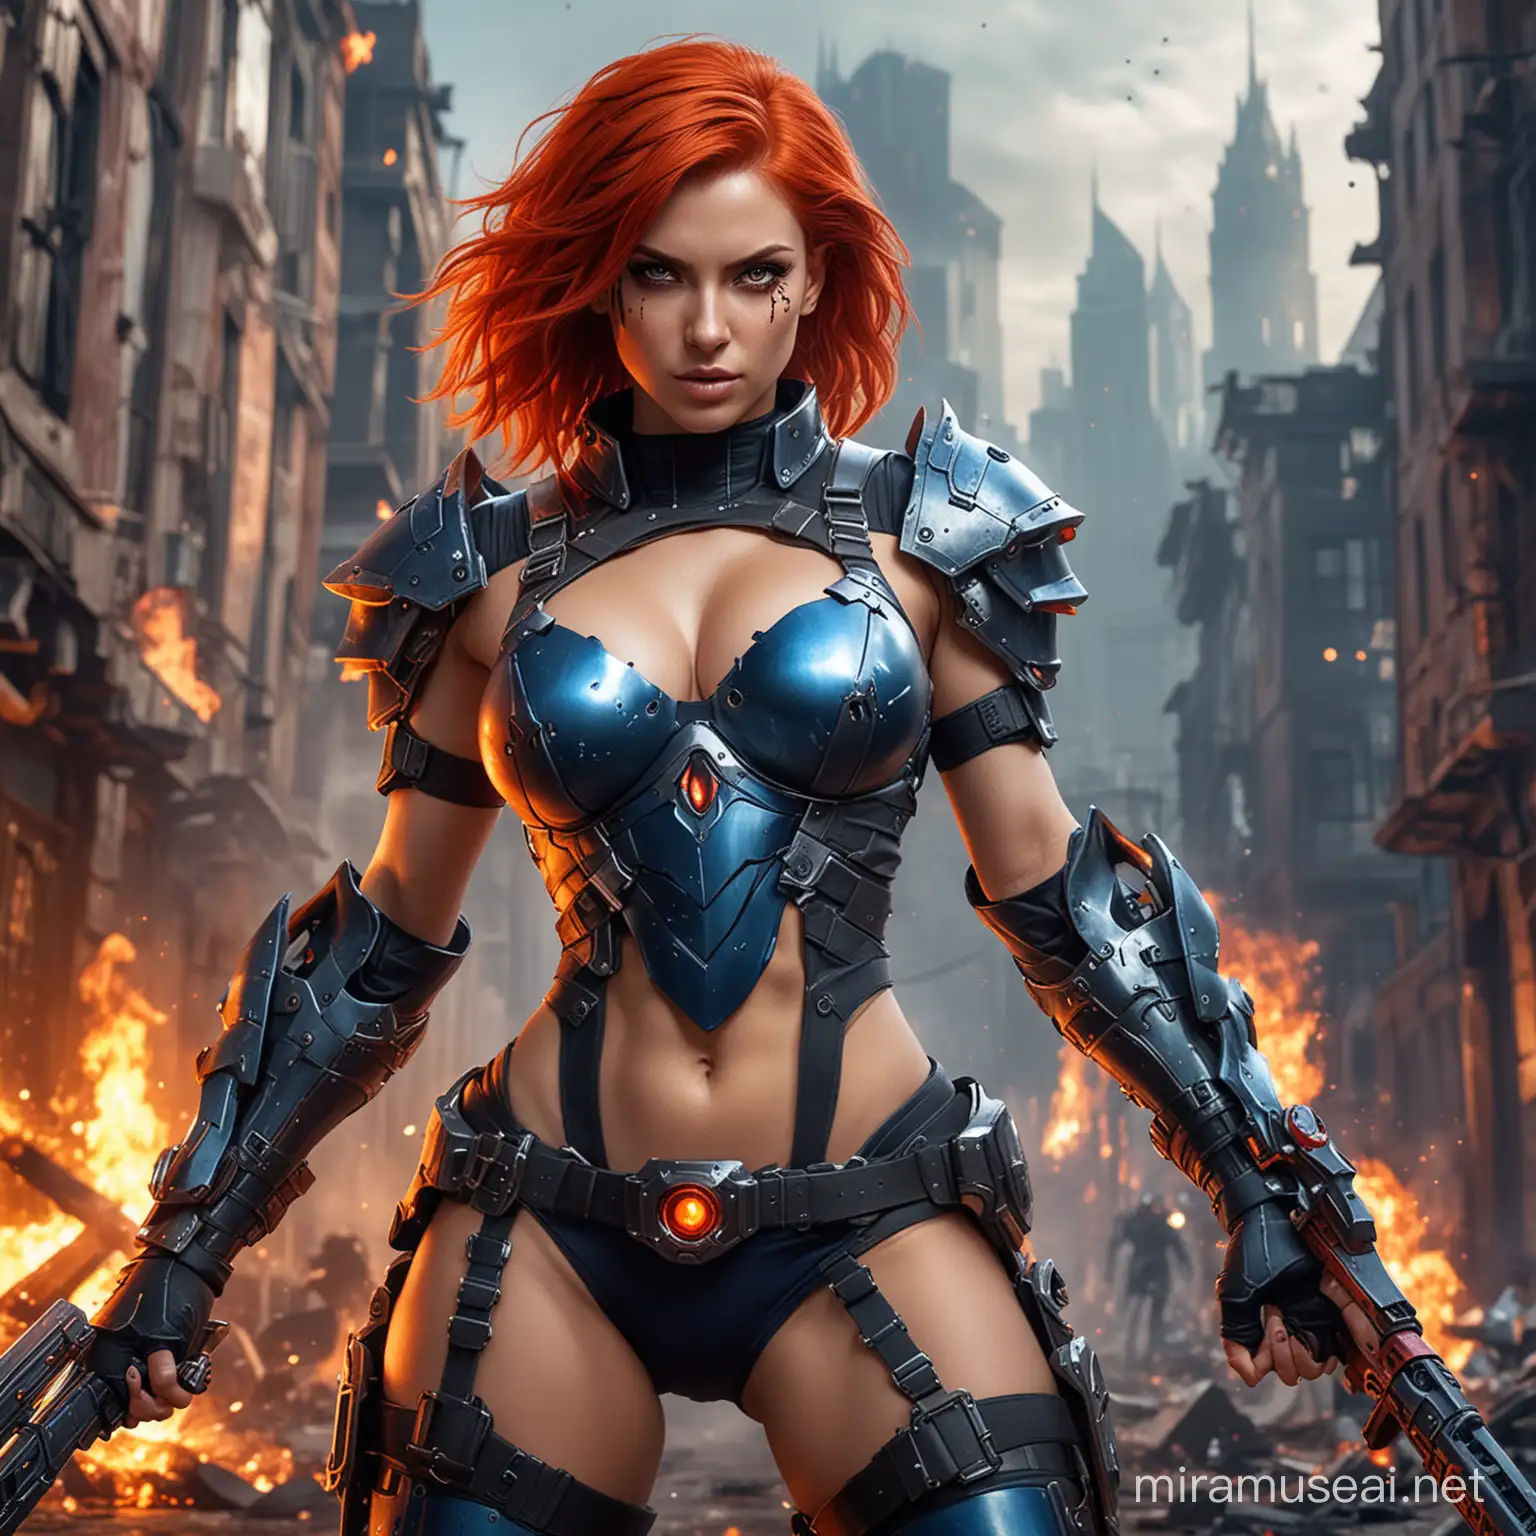 A Sexy Half Naked Female Psyker wearing a futuristic Armor and a Melee  Weapon. She is a Pyromancer and has red Hair. She has a sixpack and dark red eyes. The color of the Armor is a dark metallic blue. In the Background are Burning Buildings